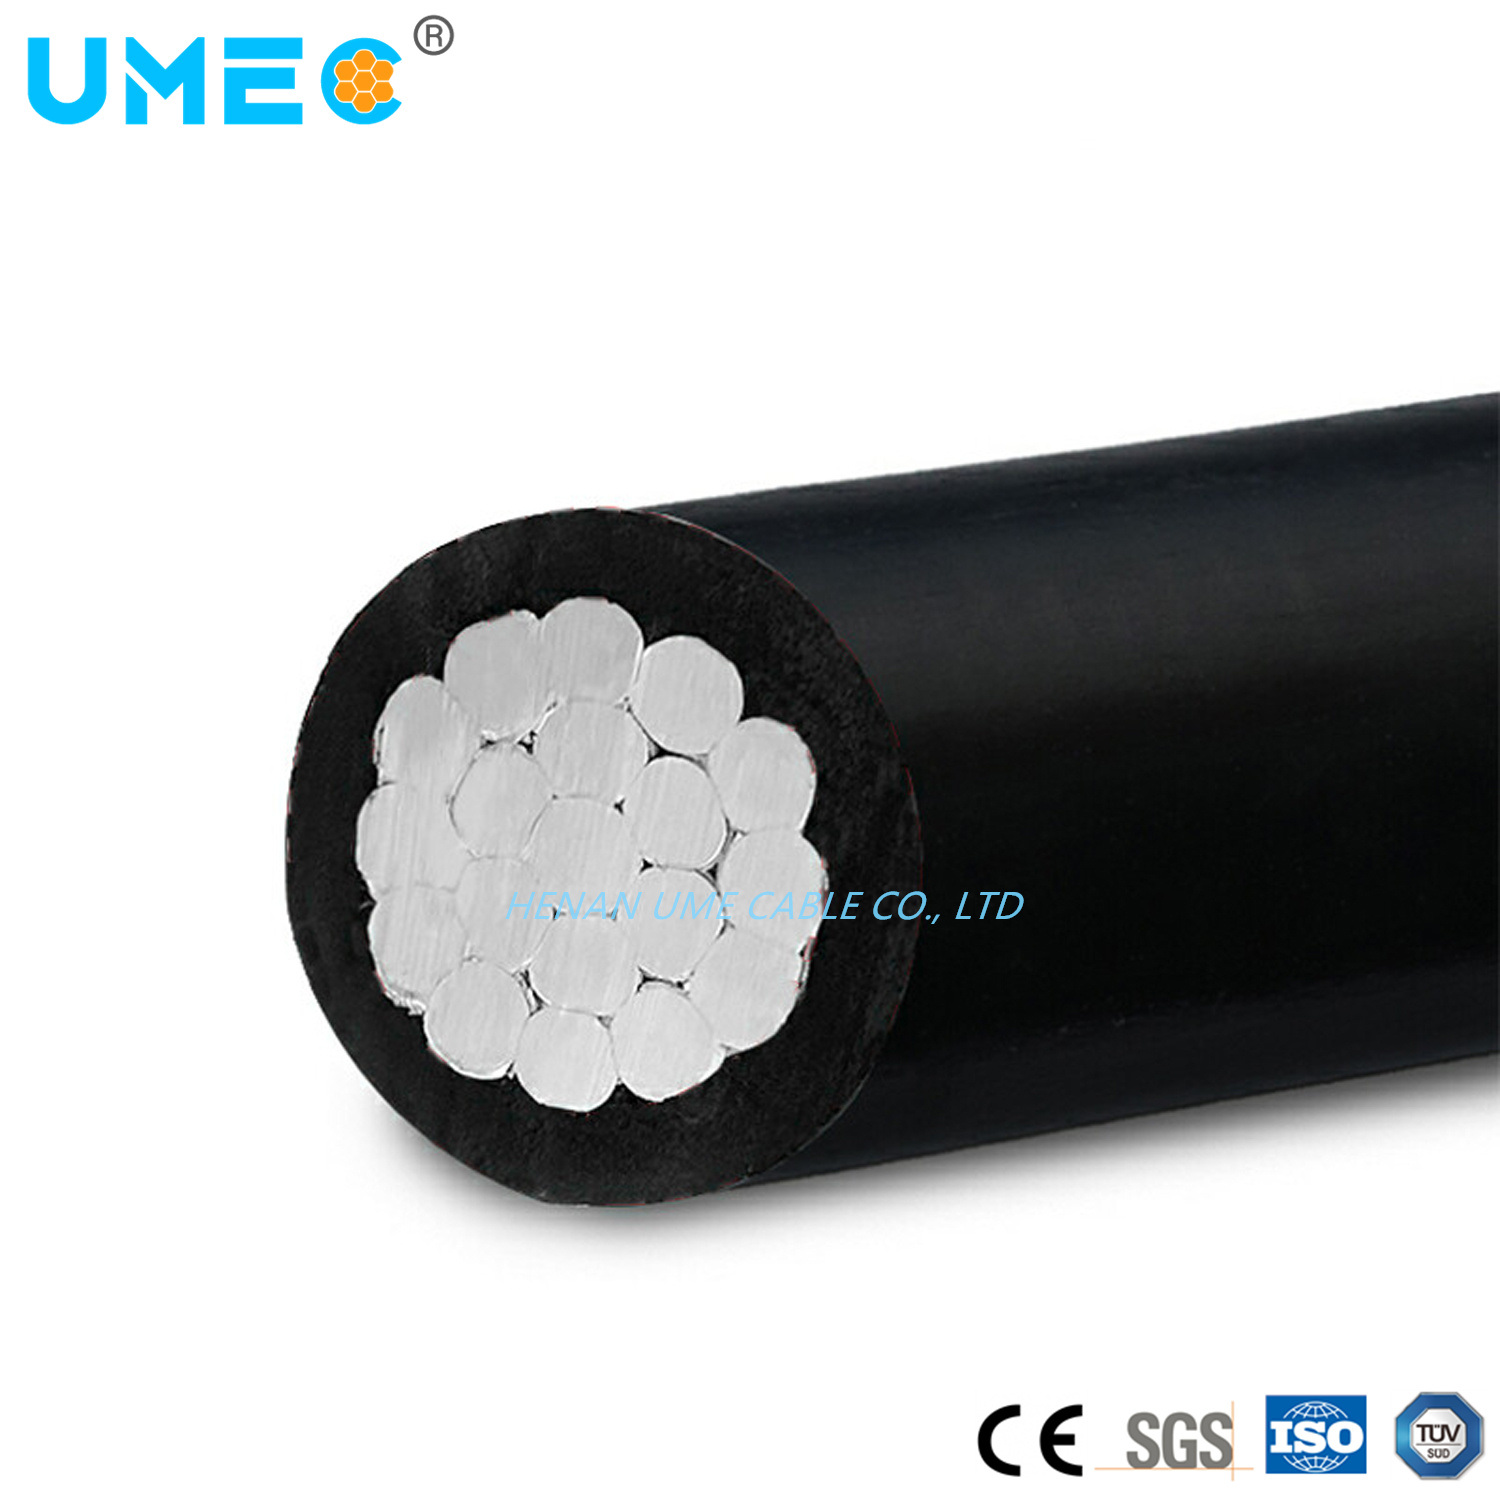 0.6-1kv Overhead Secondary Distribution Line ABC Cable Covered Line Wire